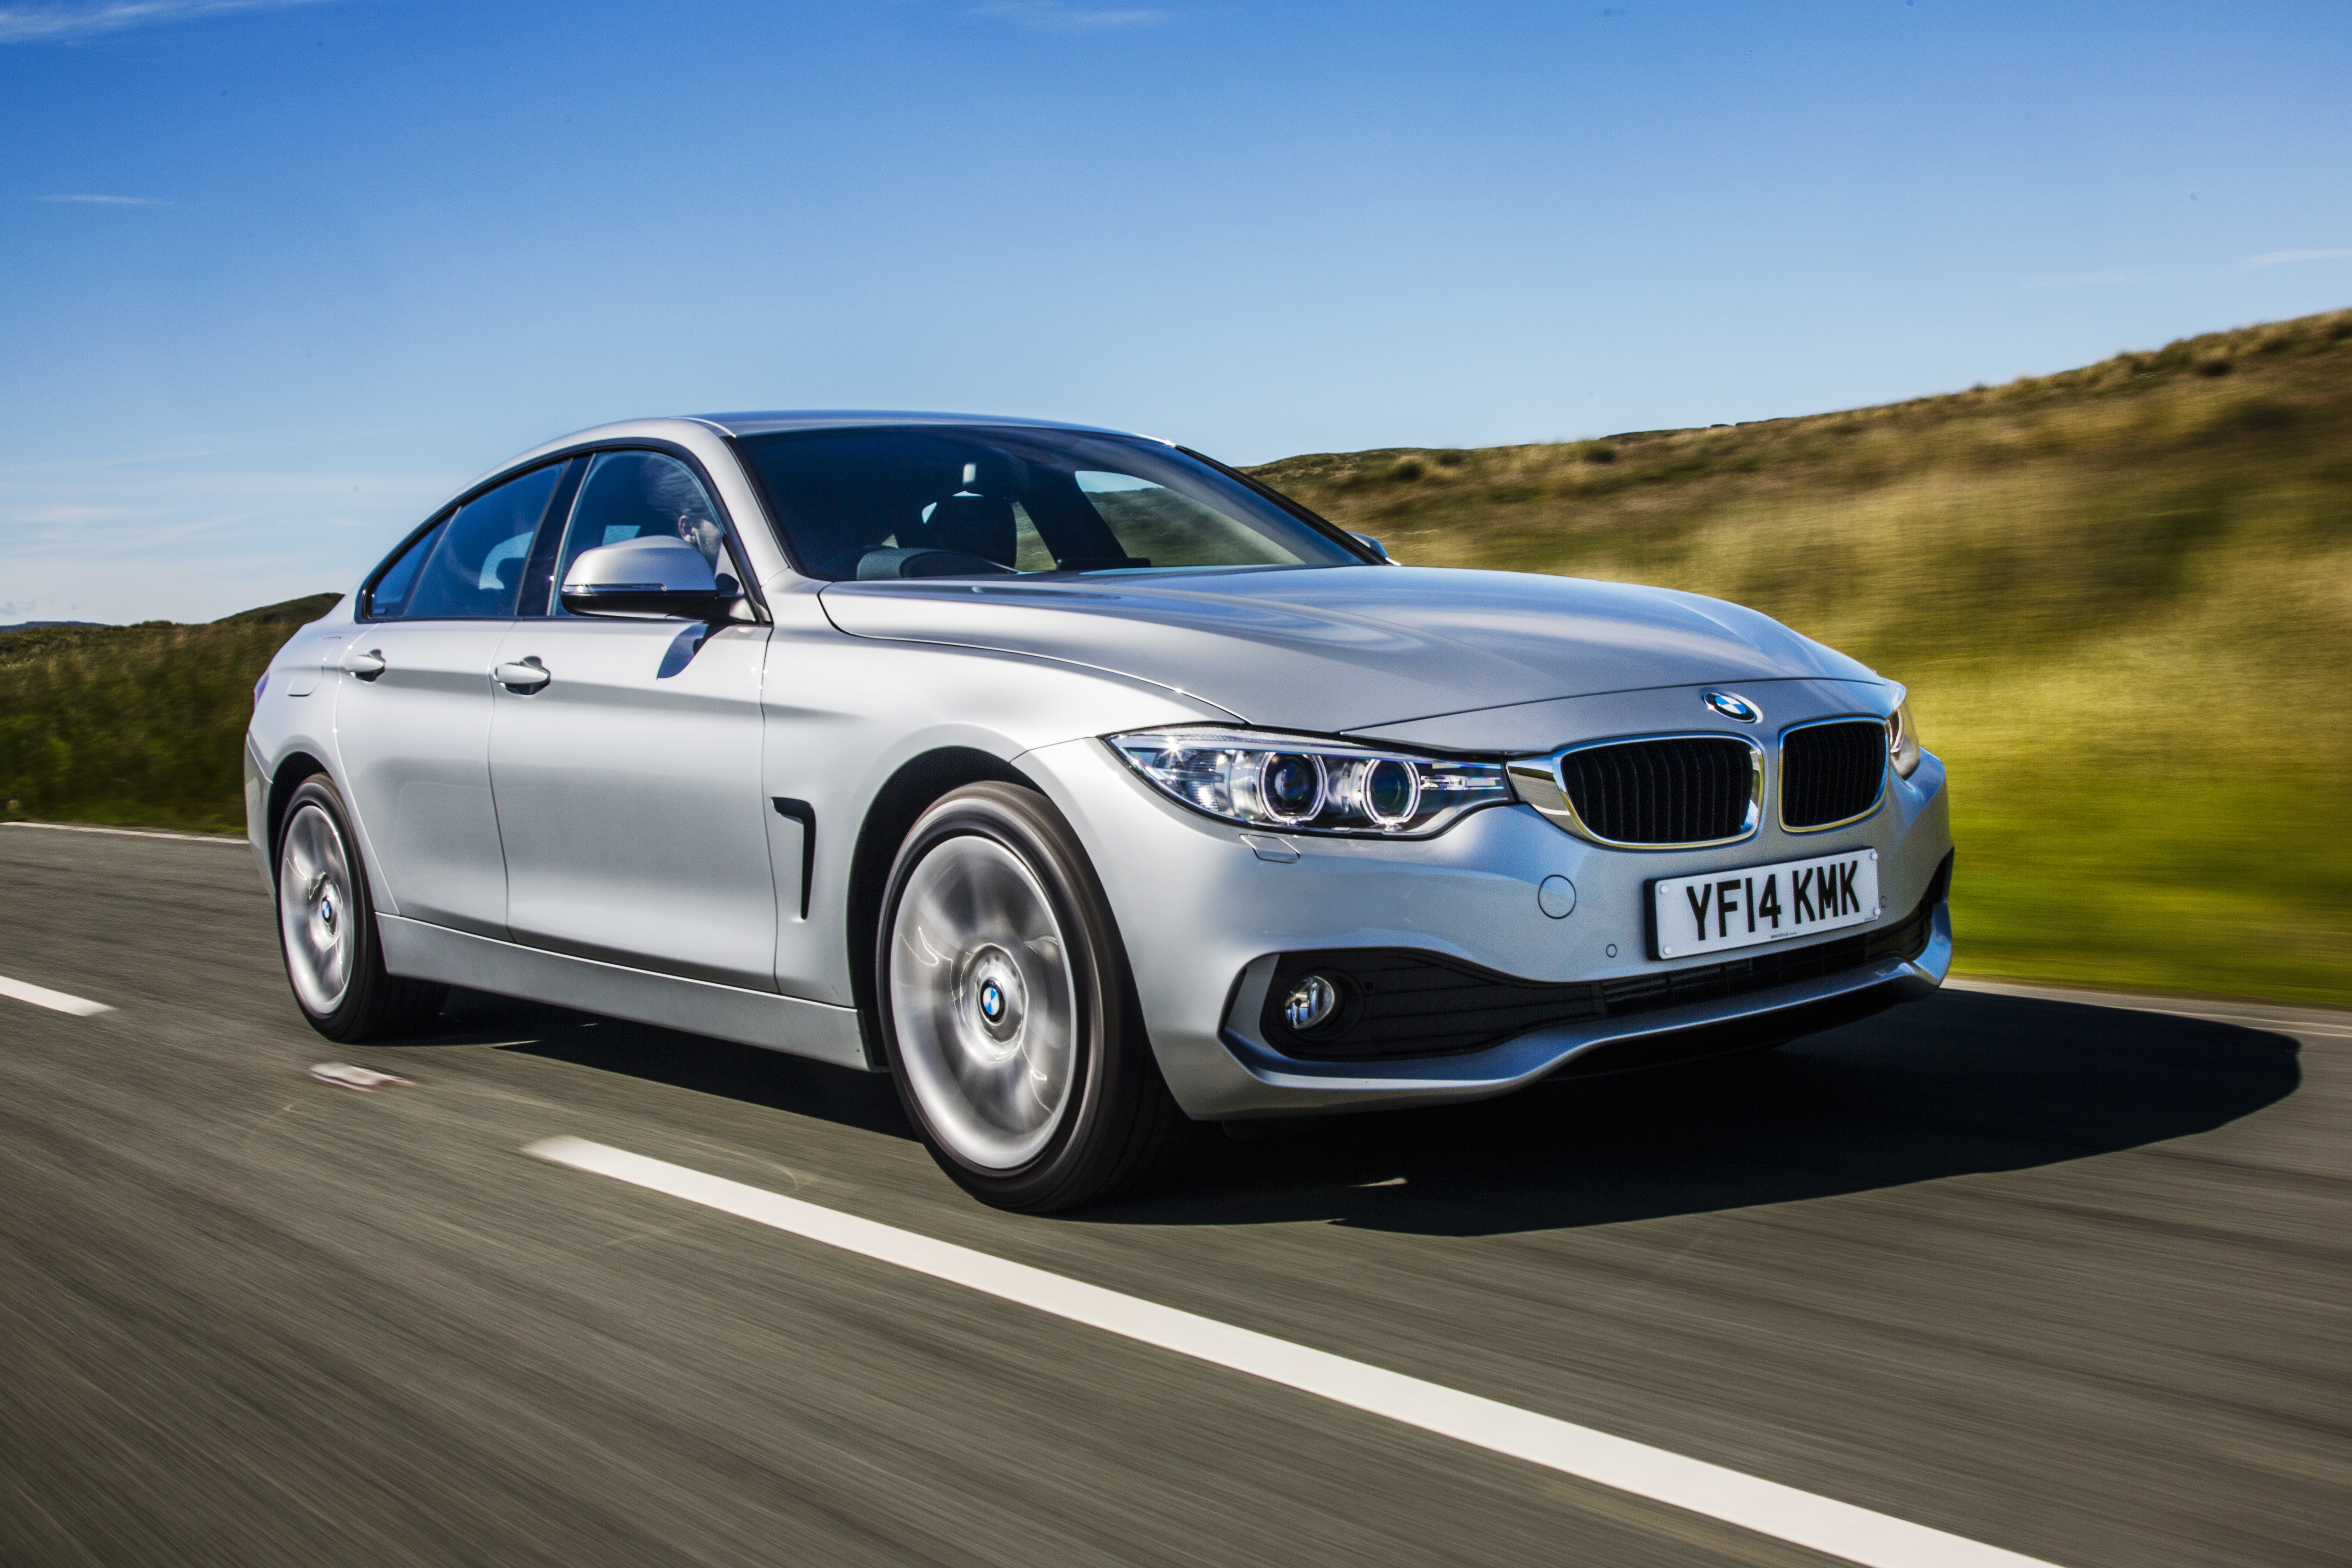 Car Review: BMW 4 Series Gran Coupe adds more doors, useful